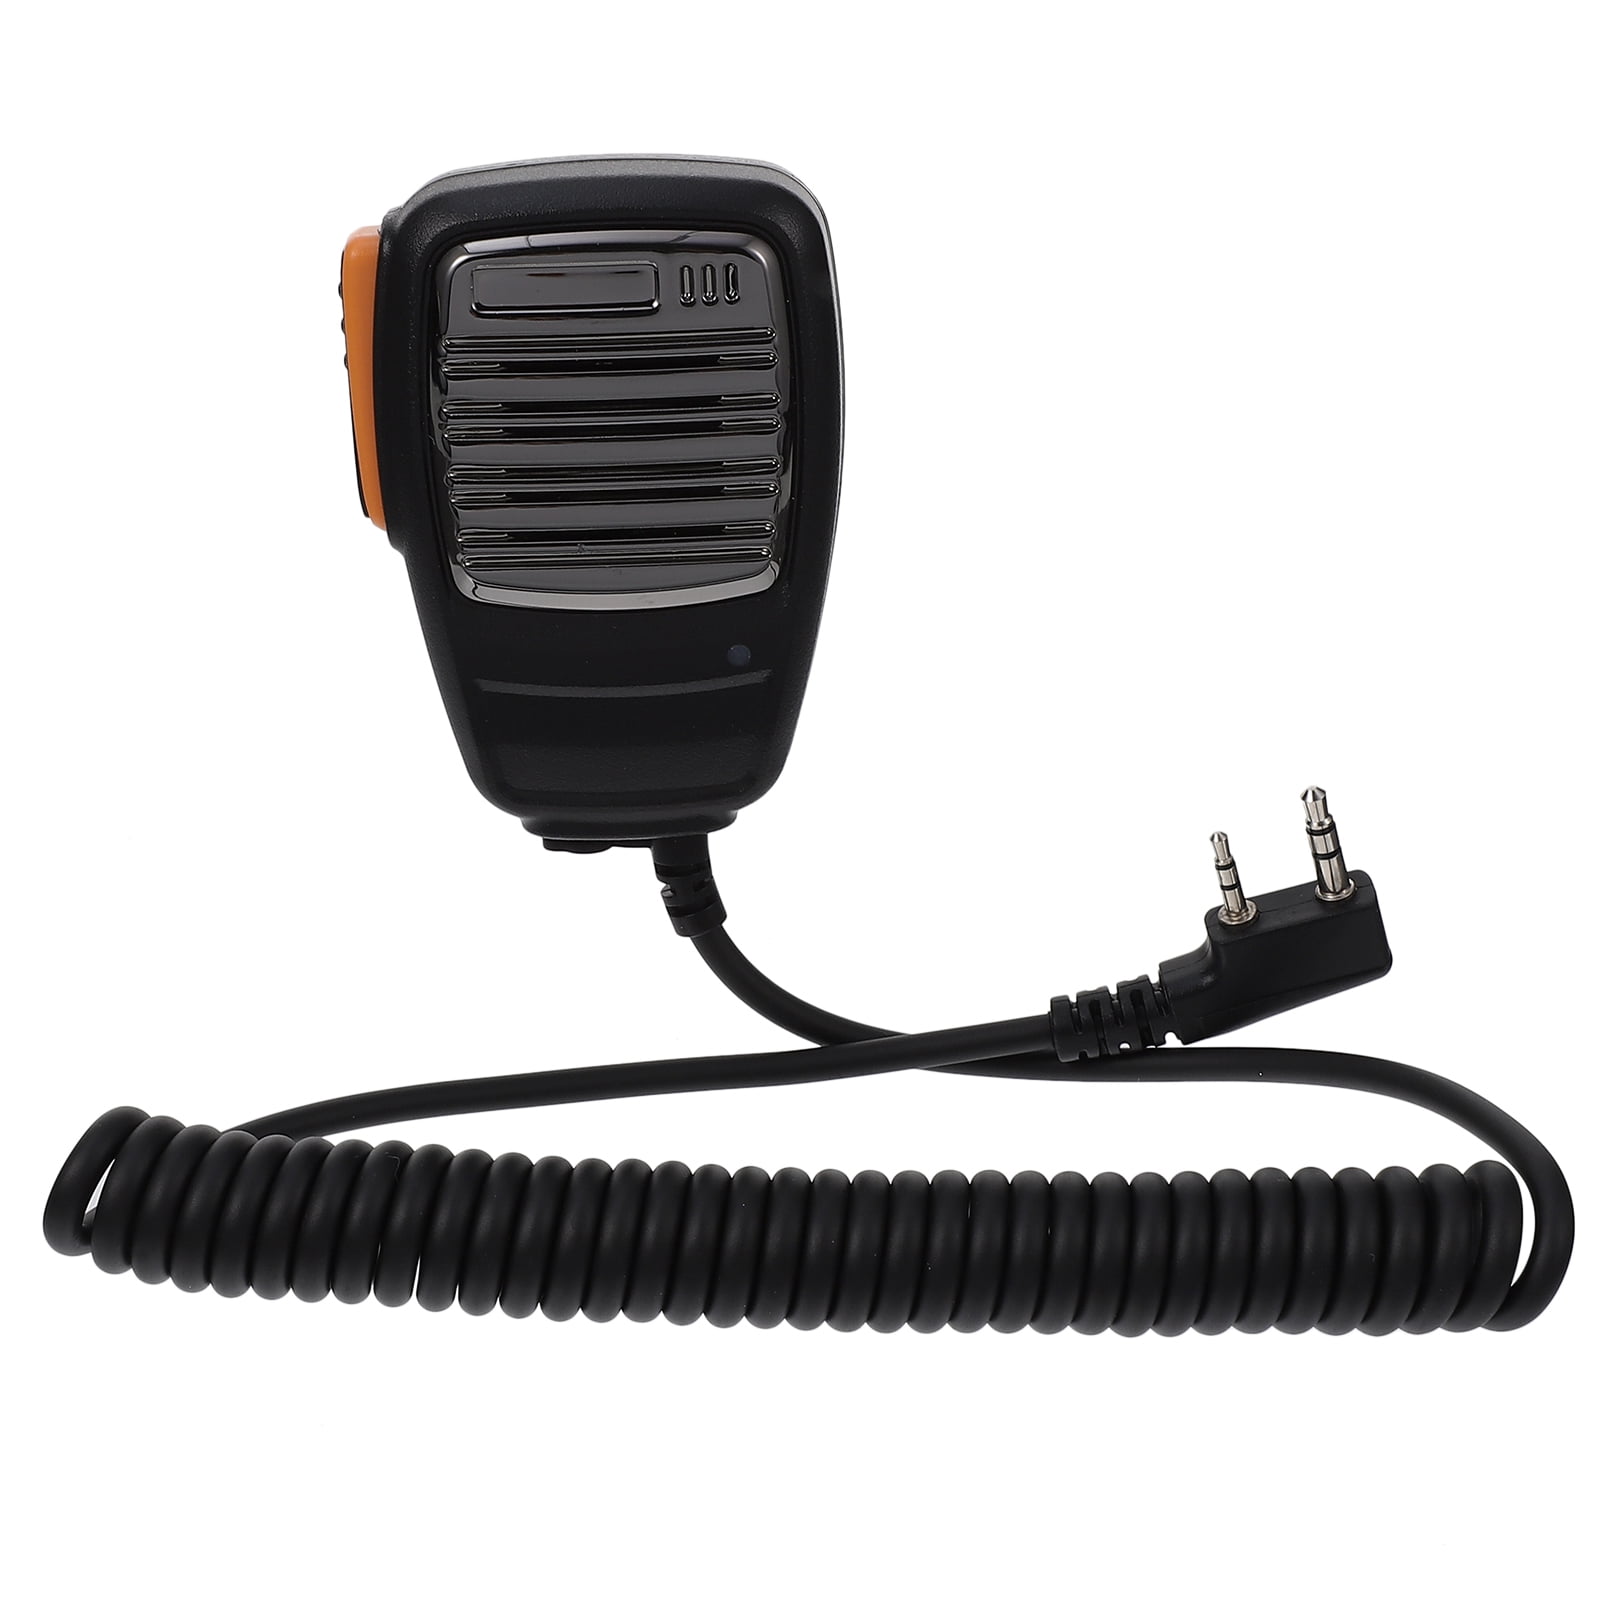 Heavy Duty】 Handheld Microphone Reinforced Cable AIRSN Shoulder Mic Speaker Compatible with Motorola XPR 6550 XPR 7550 XPR 7550e APX 6000 Walkie Talkie【with 3.5mm Audio Jack 